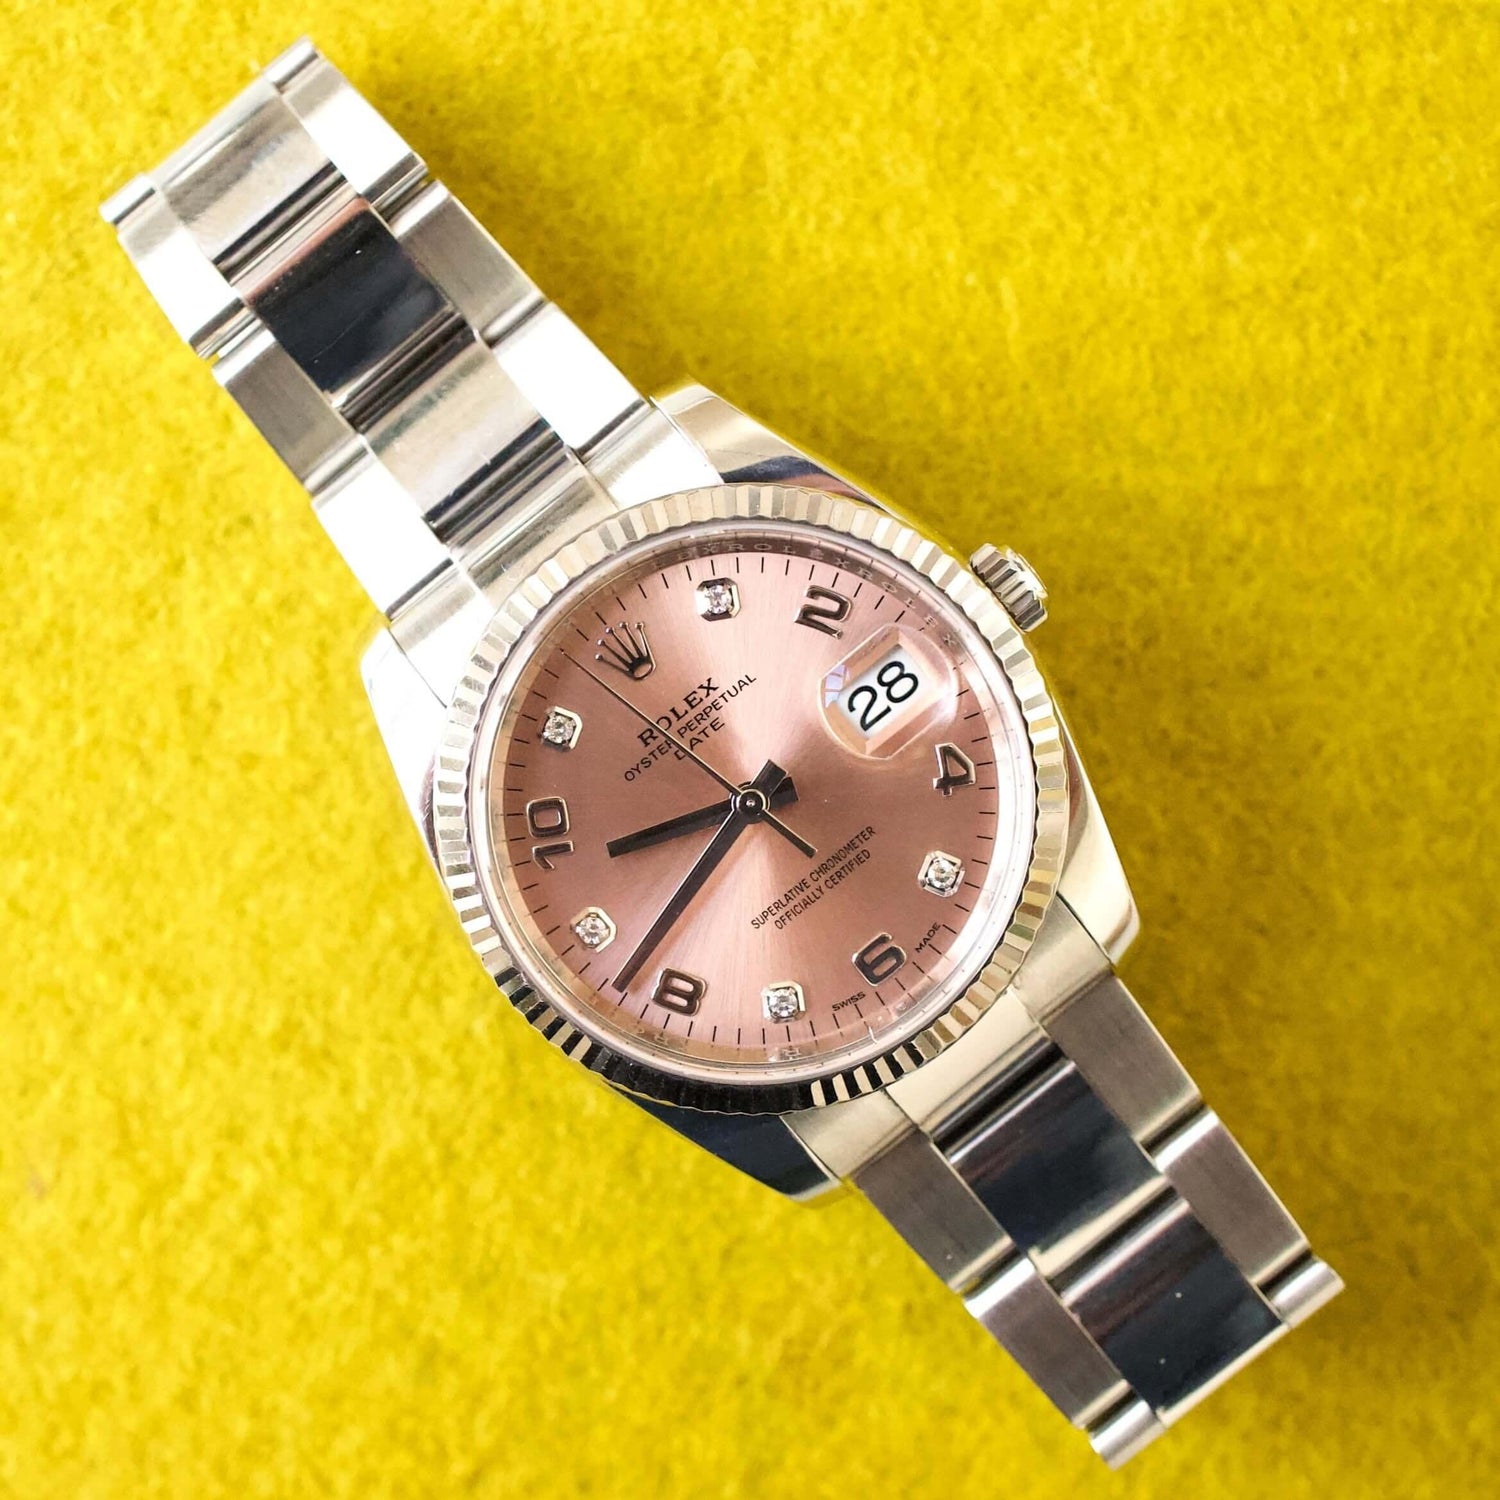 Rolex Oyster Perpetual Date 115234 34MM Factory Pink/Salmon Diamond Dial Factory Warranty Travel Box and Service Papers